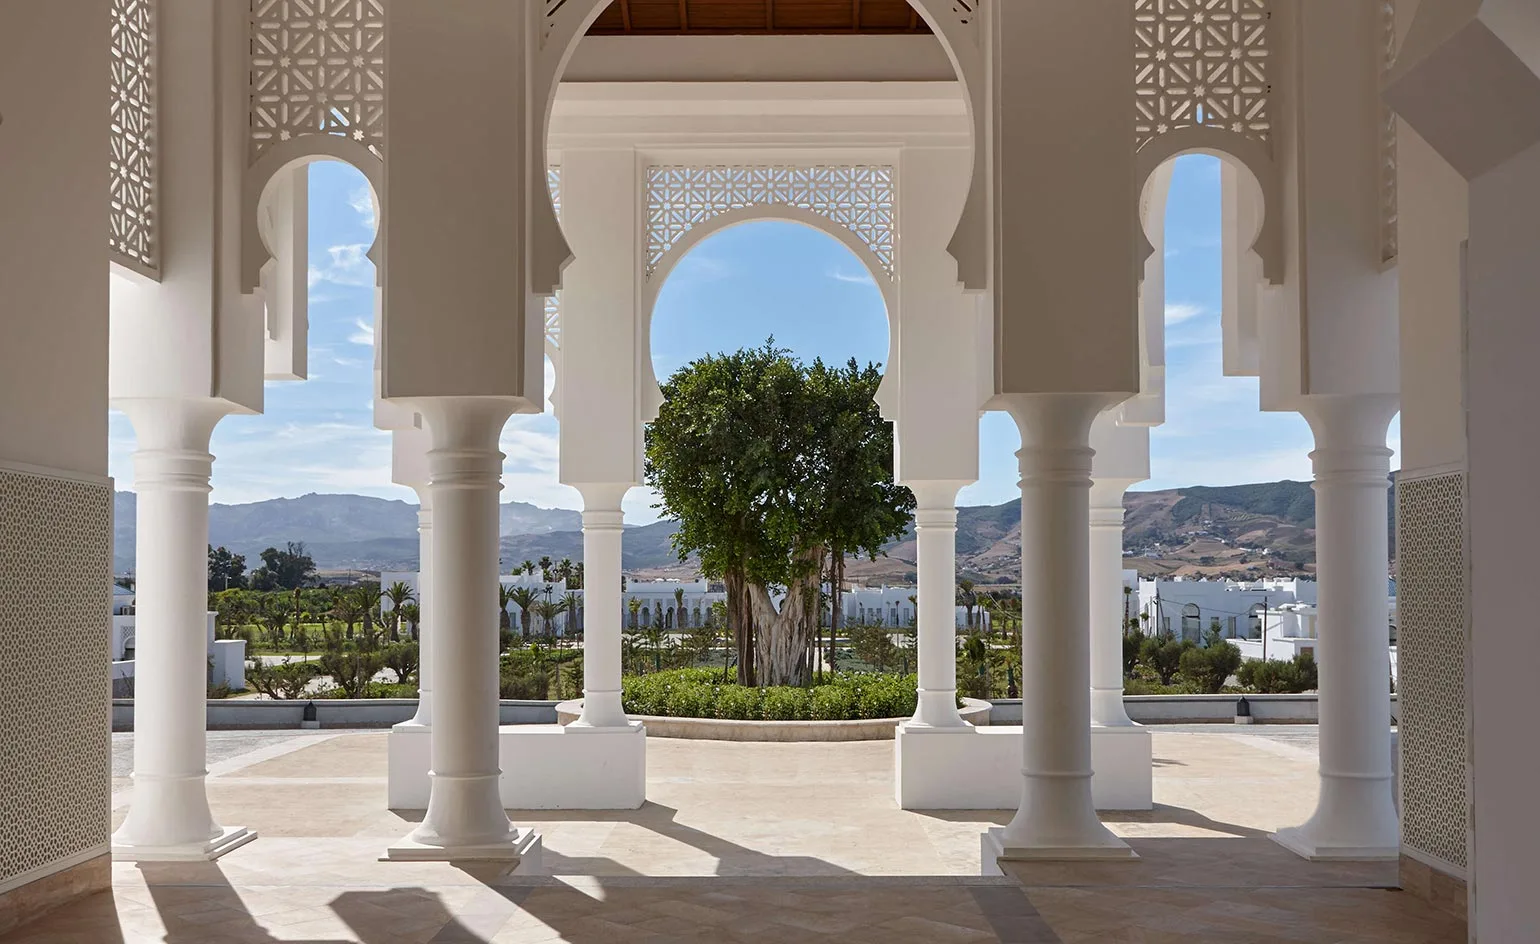 8 of the Best Places to Stay in Morocco